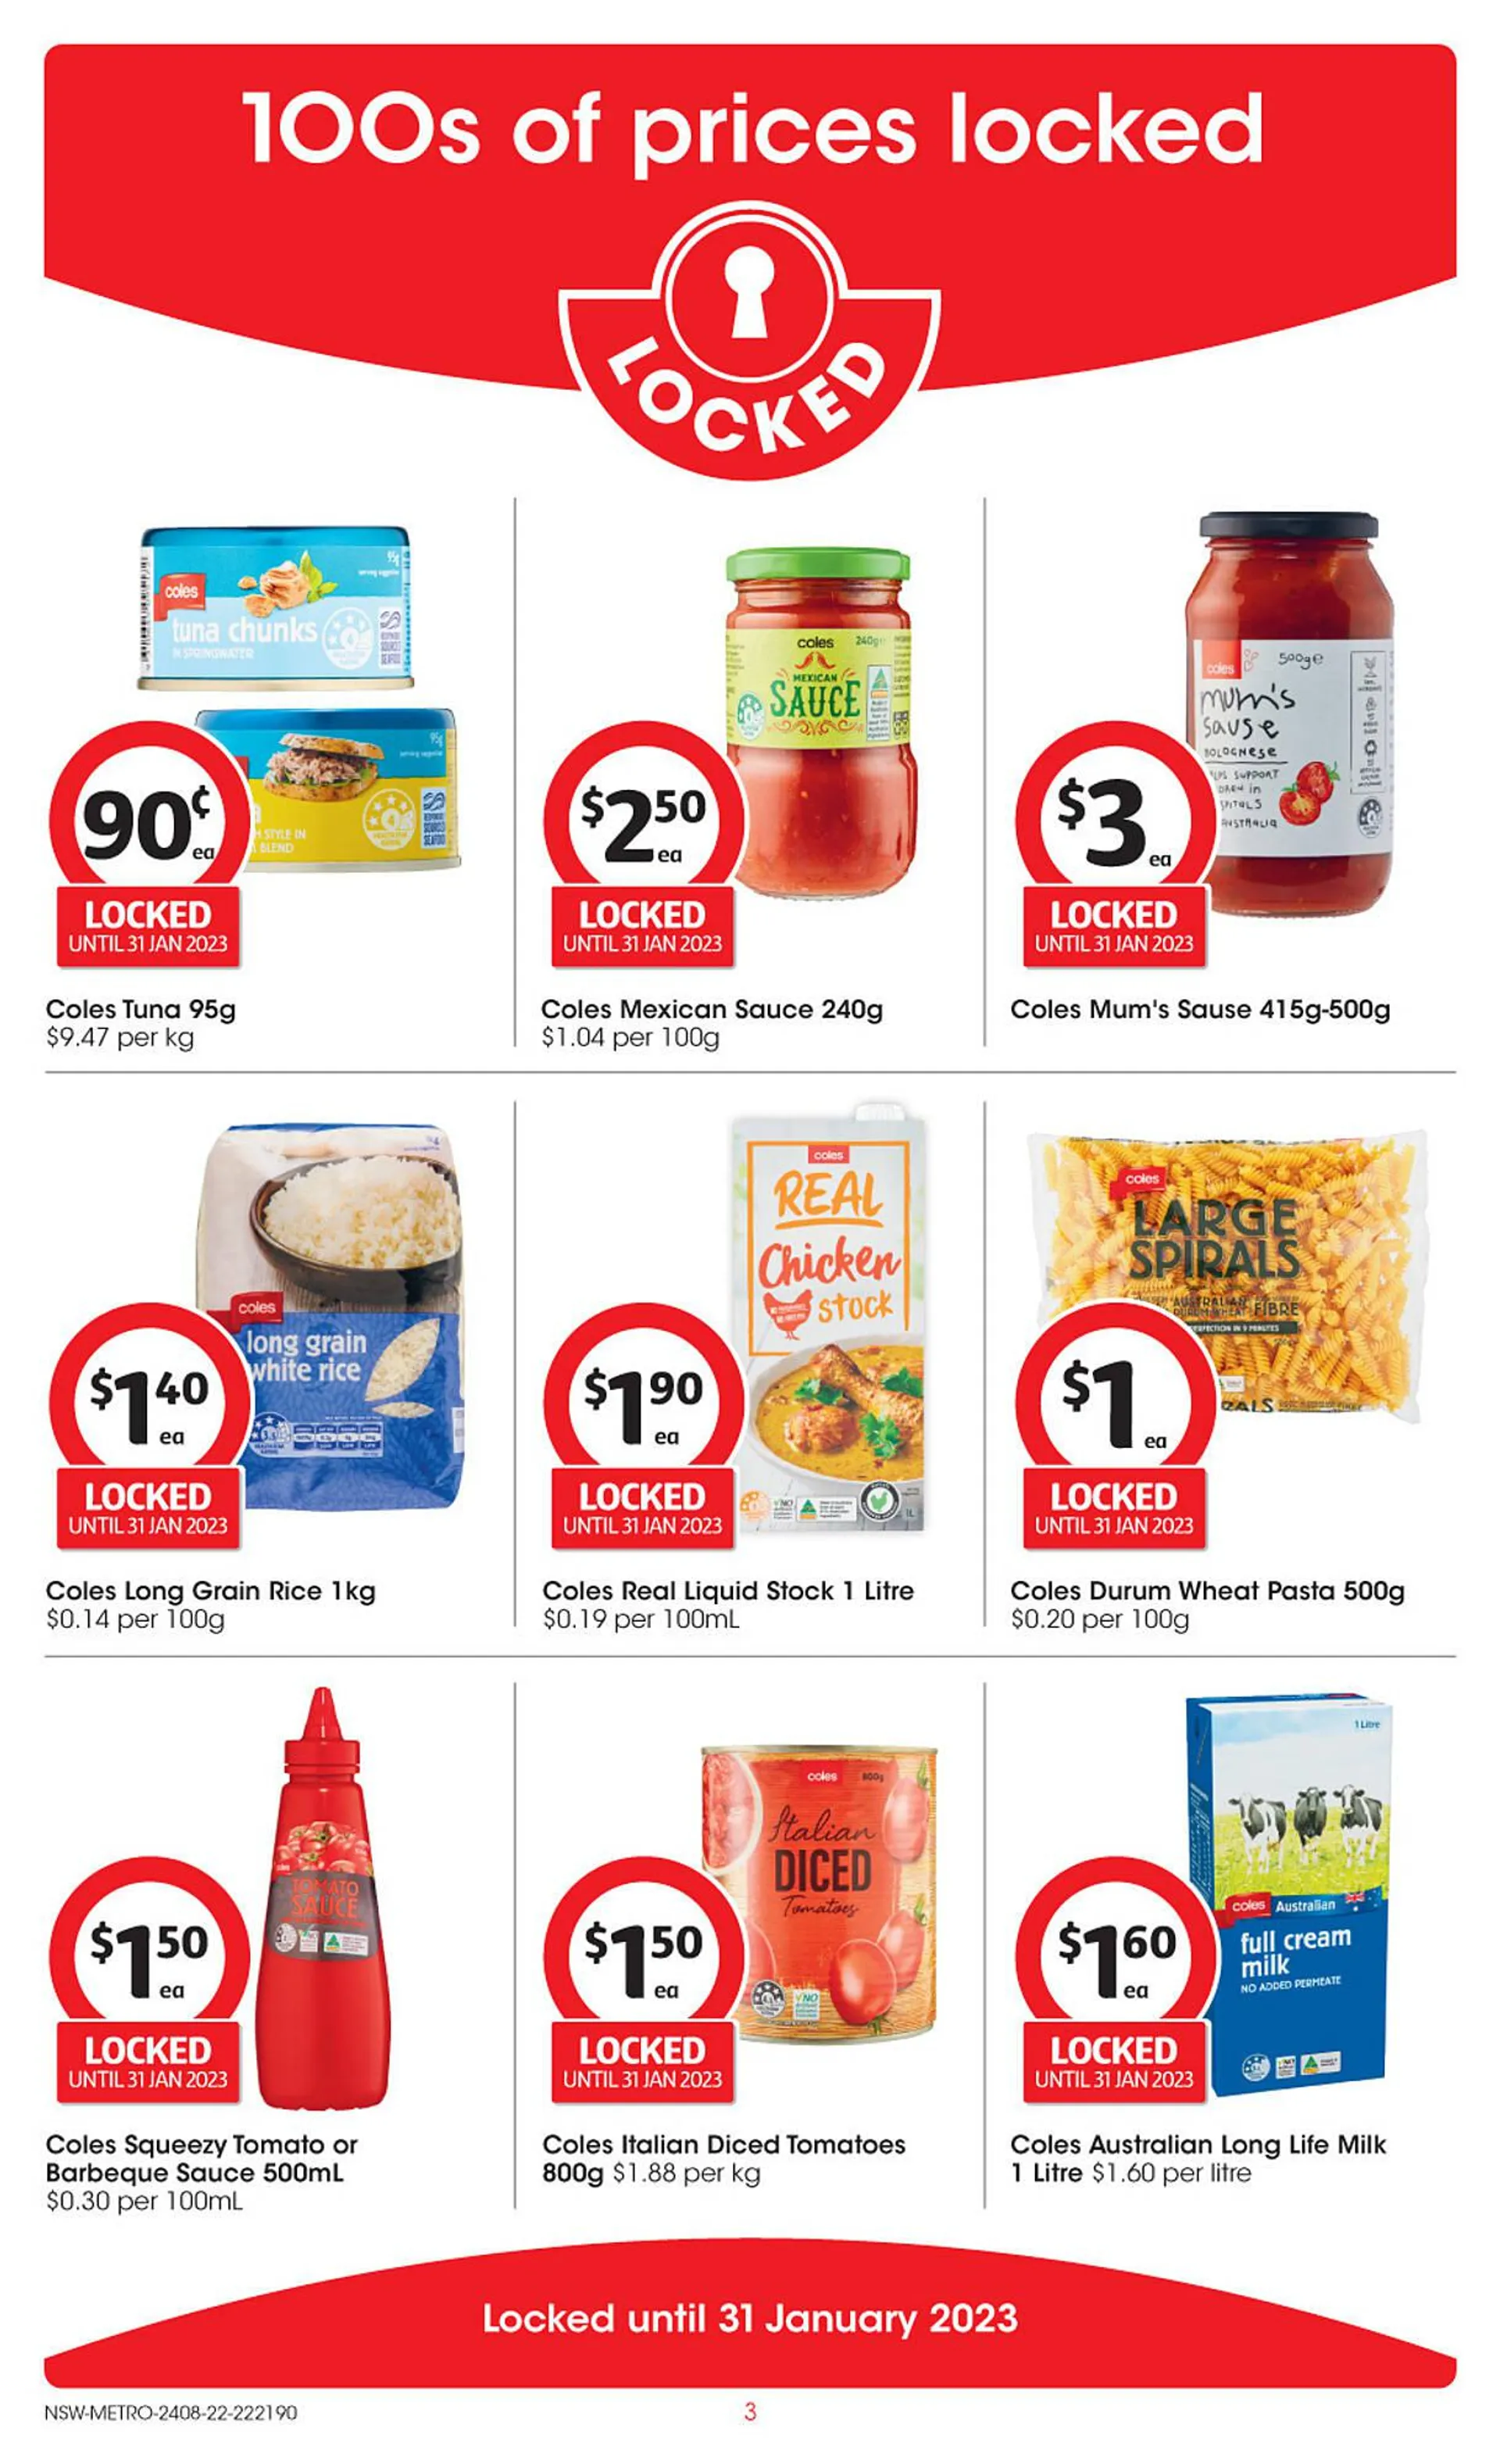 Coles catalogue - 100s of Prices Locked - 3